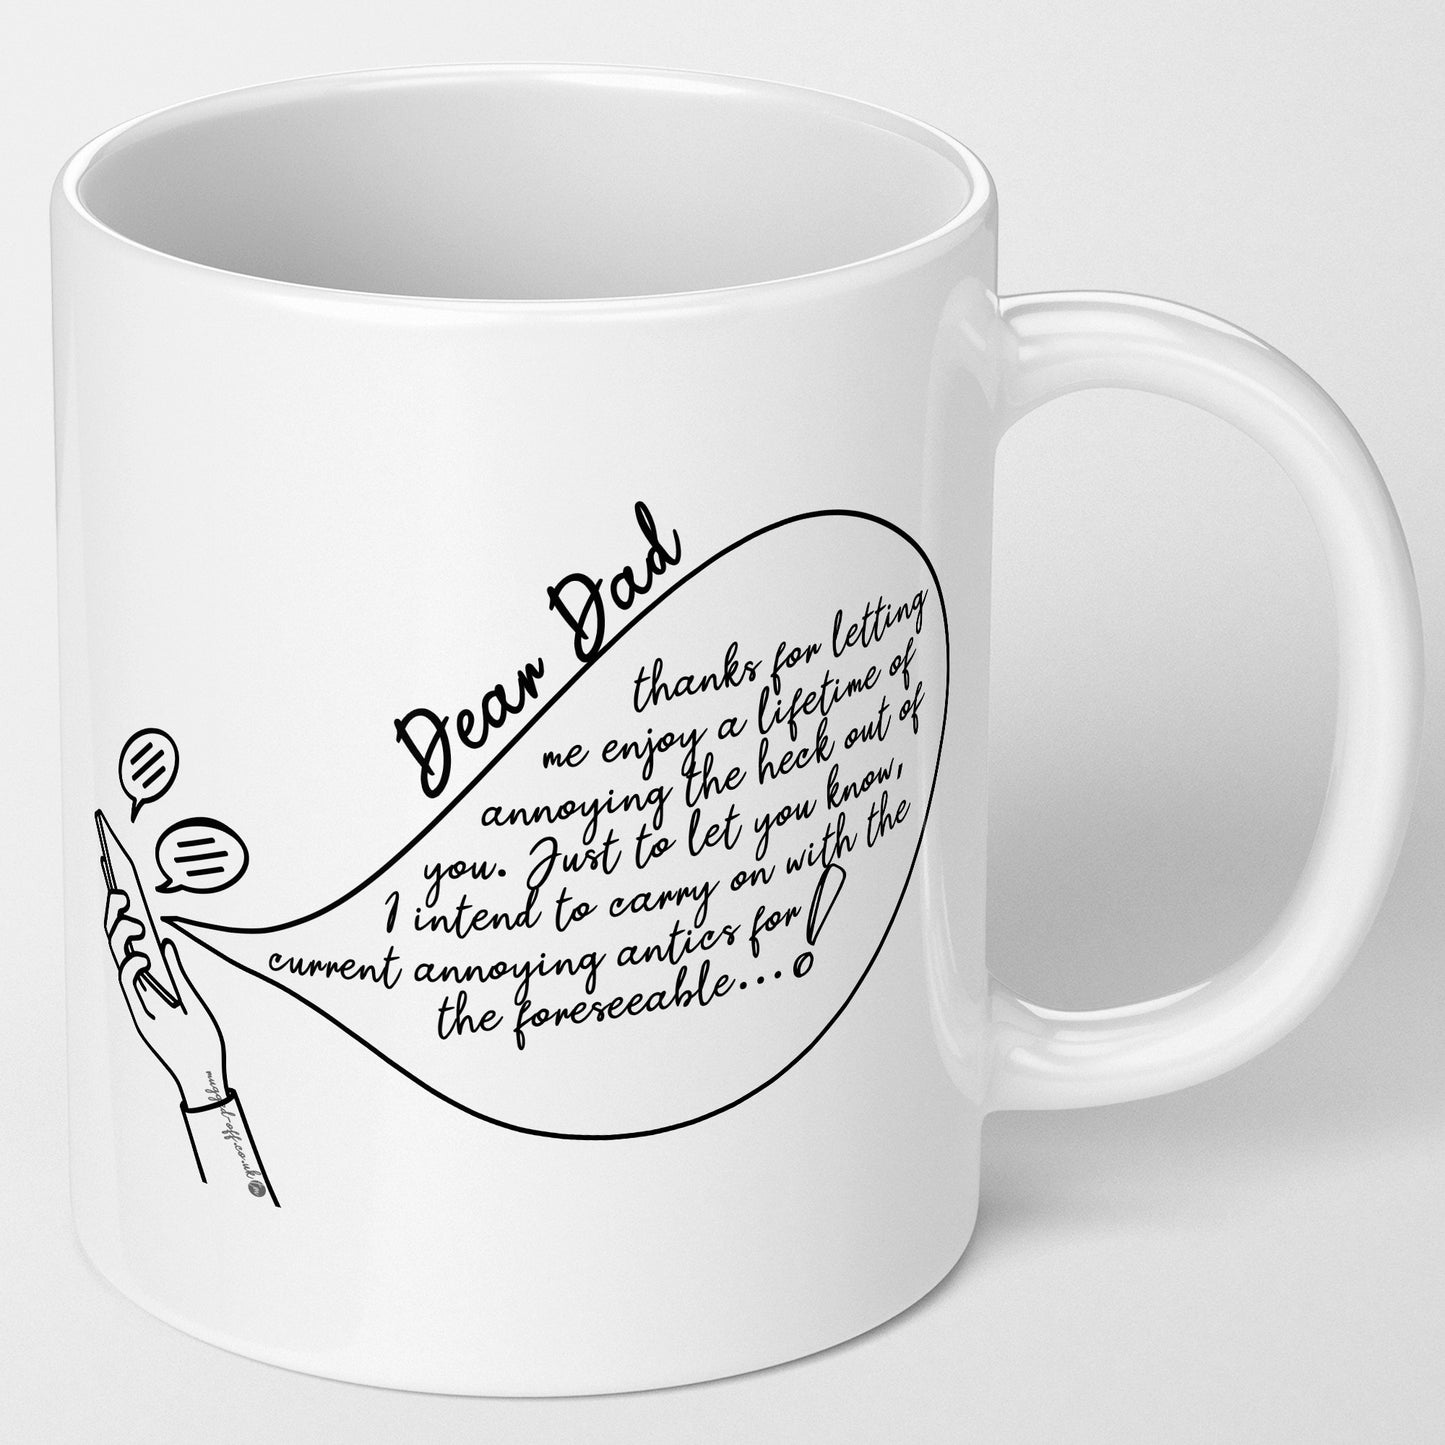 Dear Dad Mug Gifts unique Father's Day gift ideas